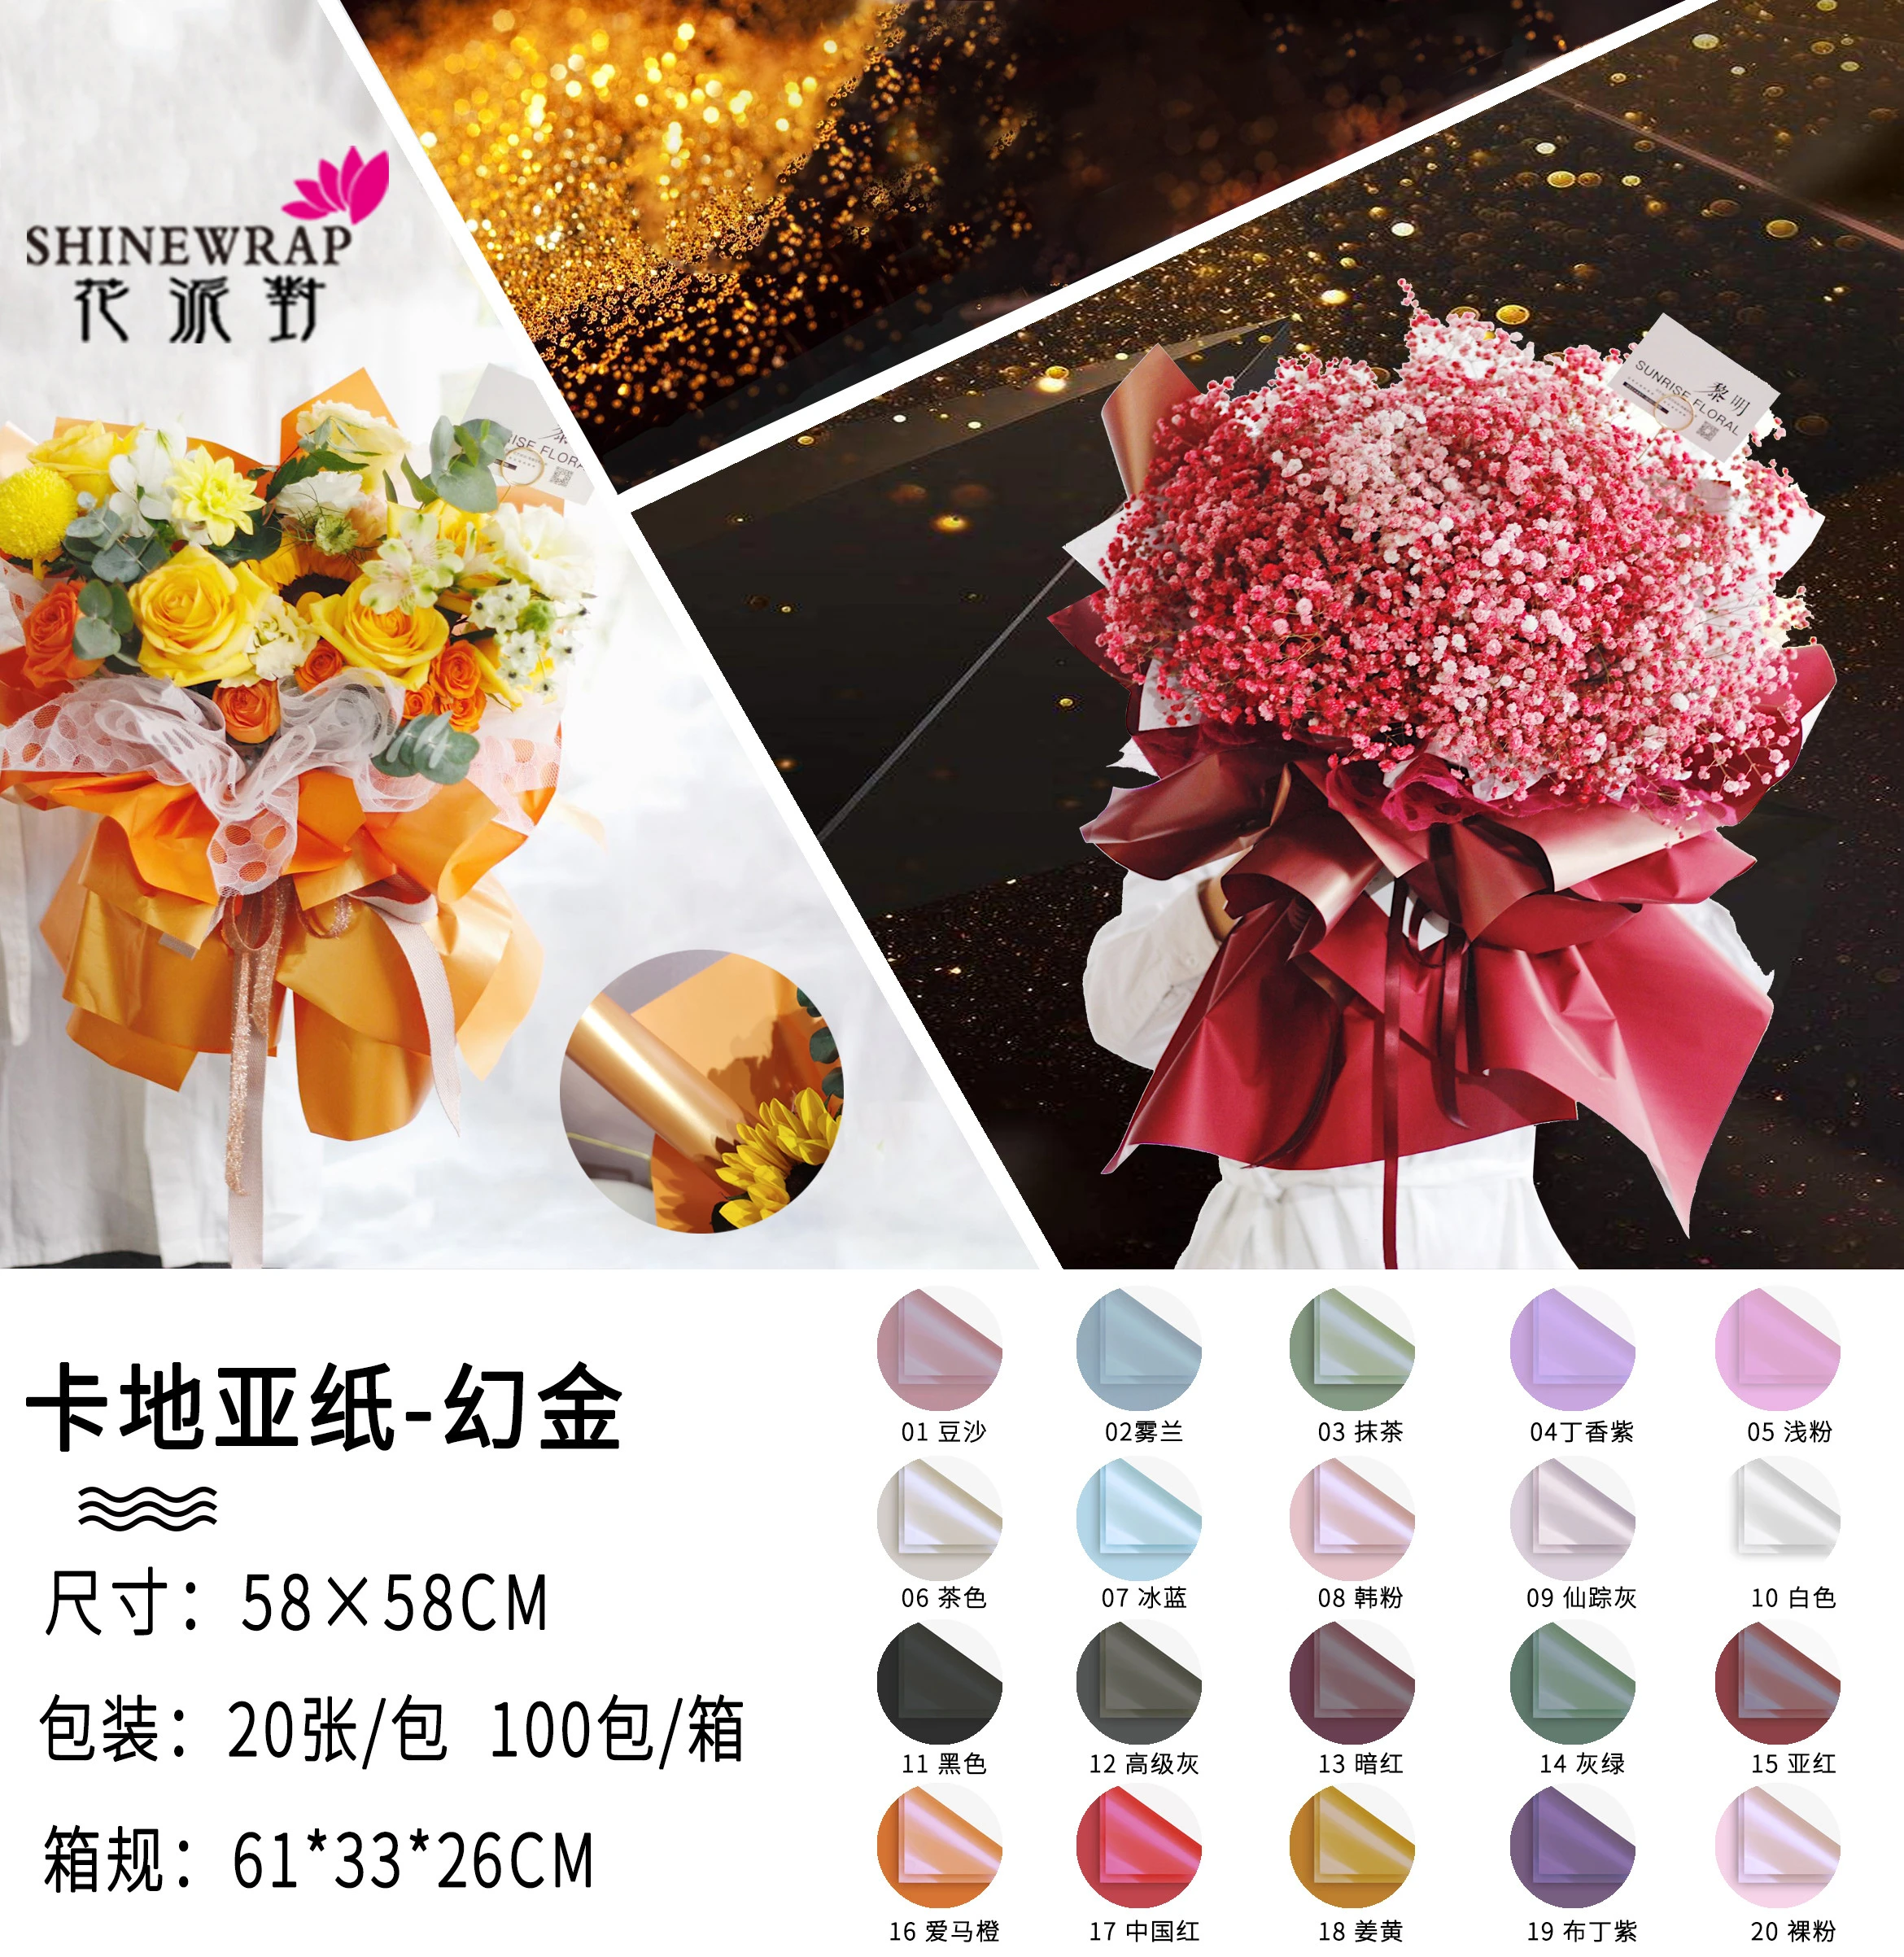 Shinewrap 2020 Dreamlike Color Brilliant Cover Flower Wrapping Paper Yiwu Offset Printing Paper